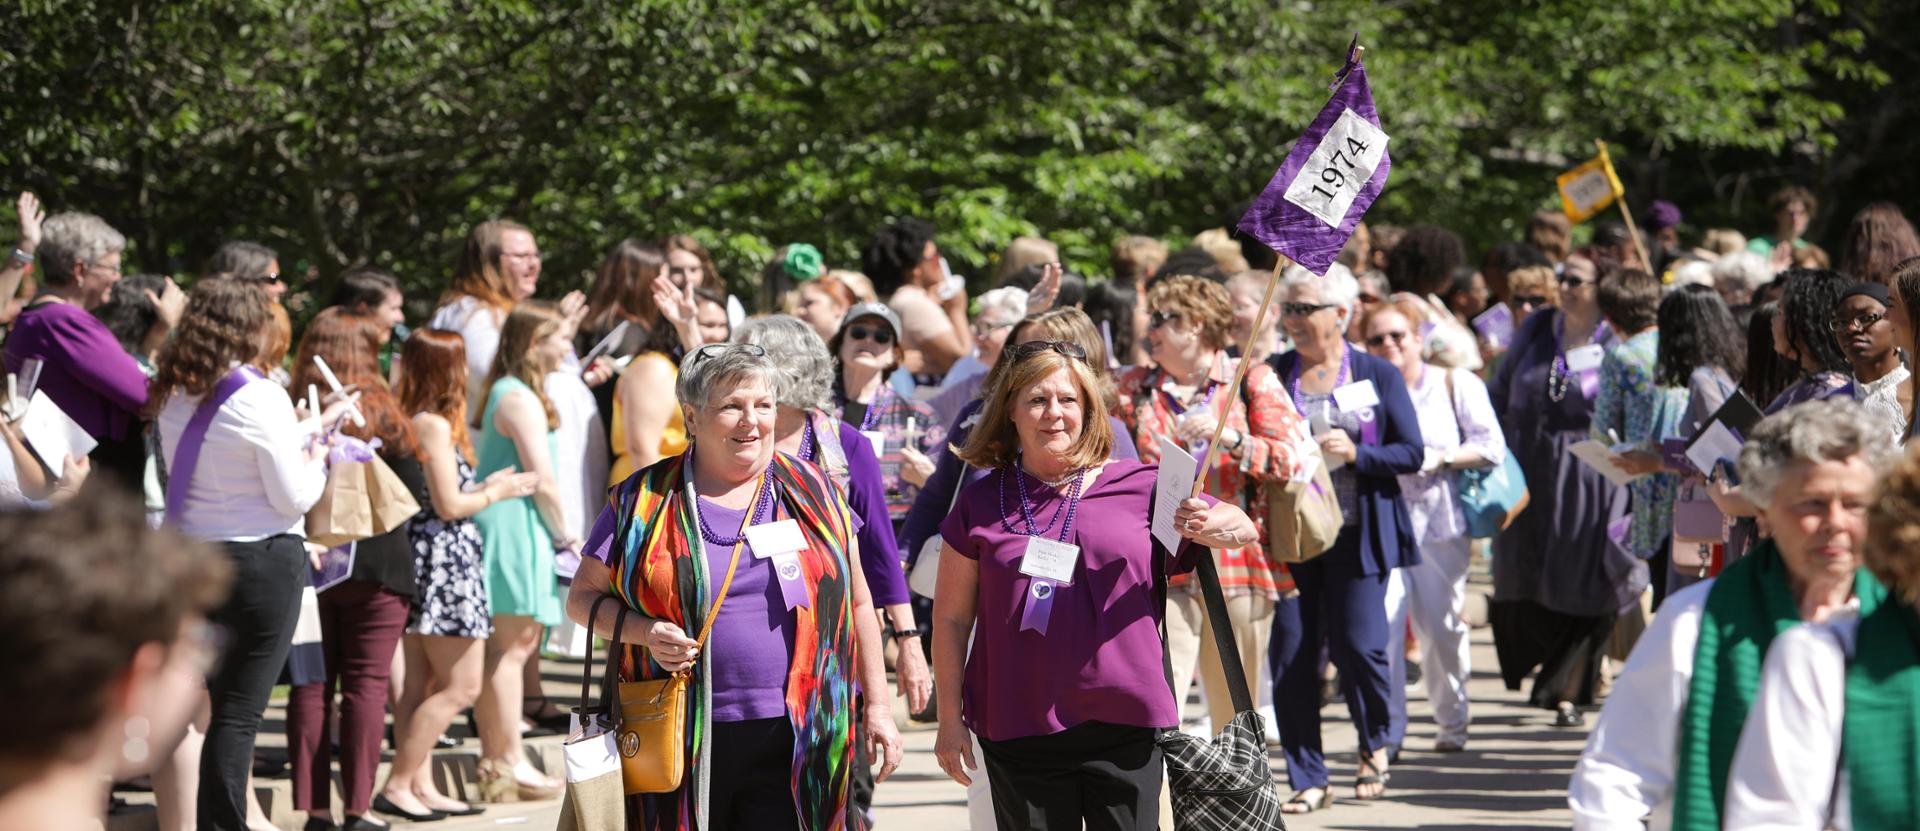 Class of 1974 marching at 2019 Alumnae Weekend